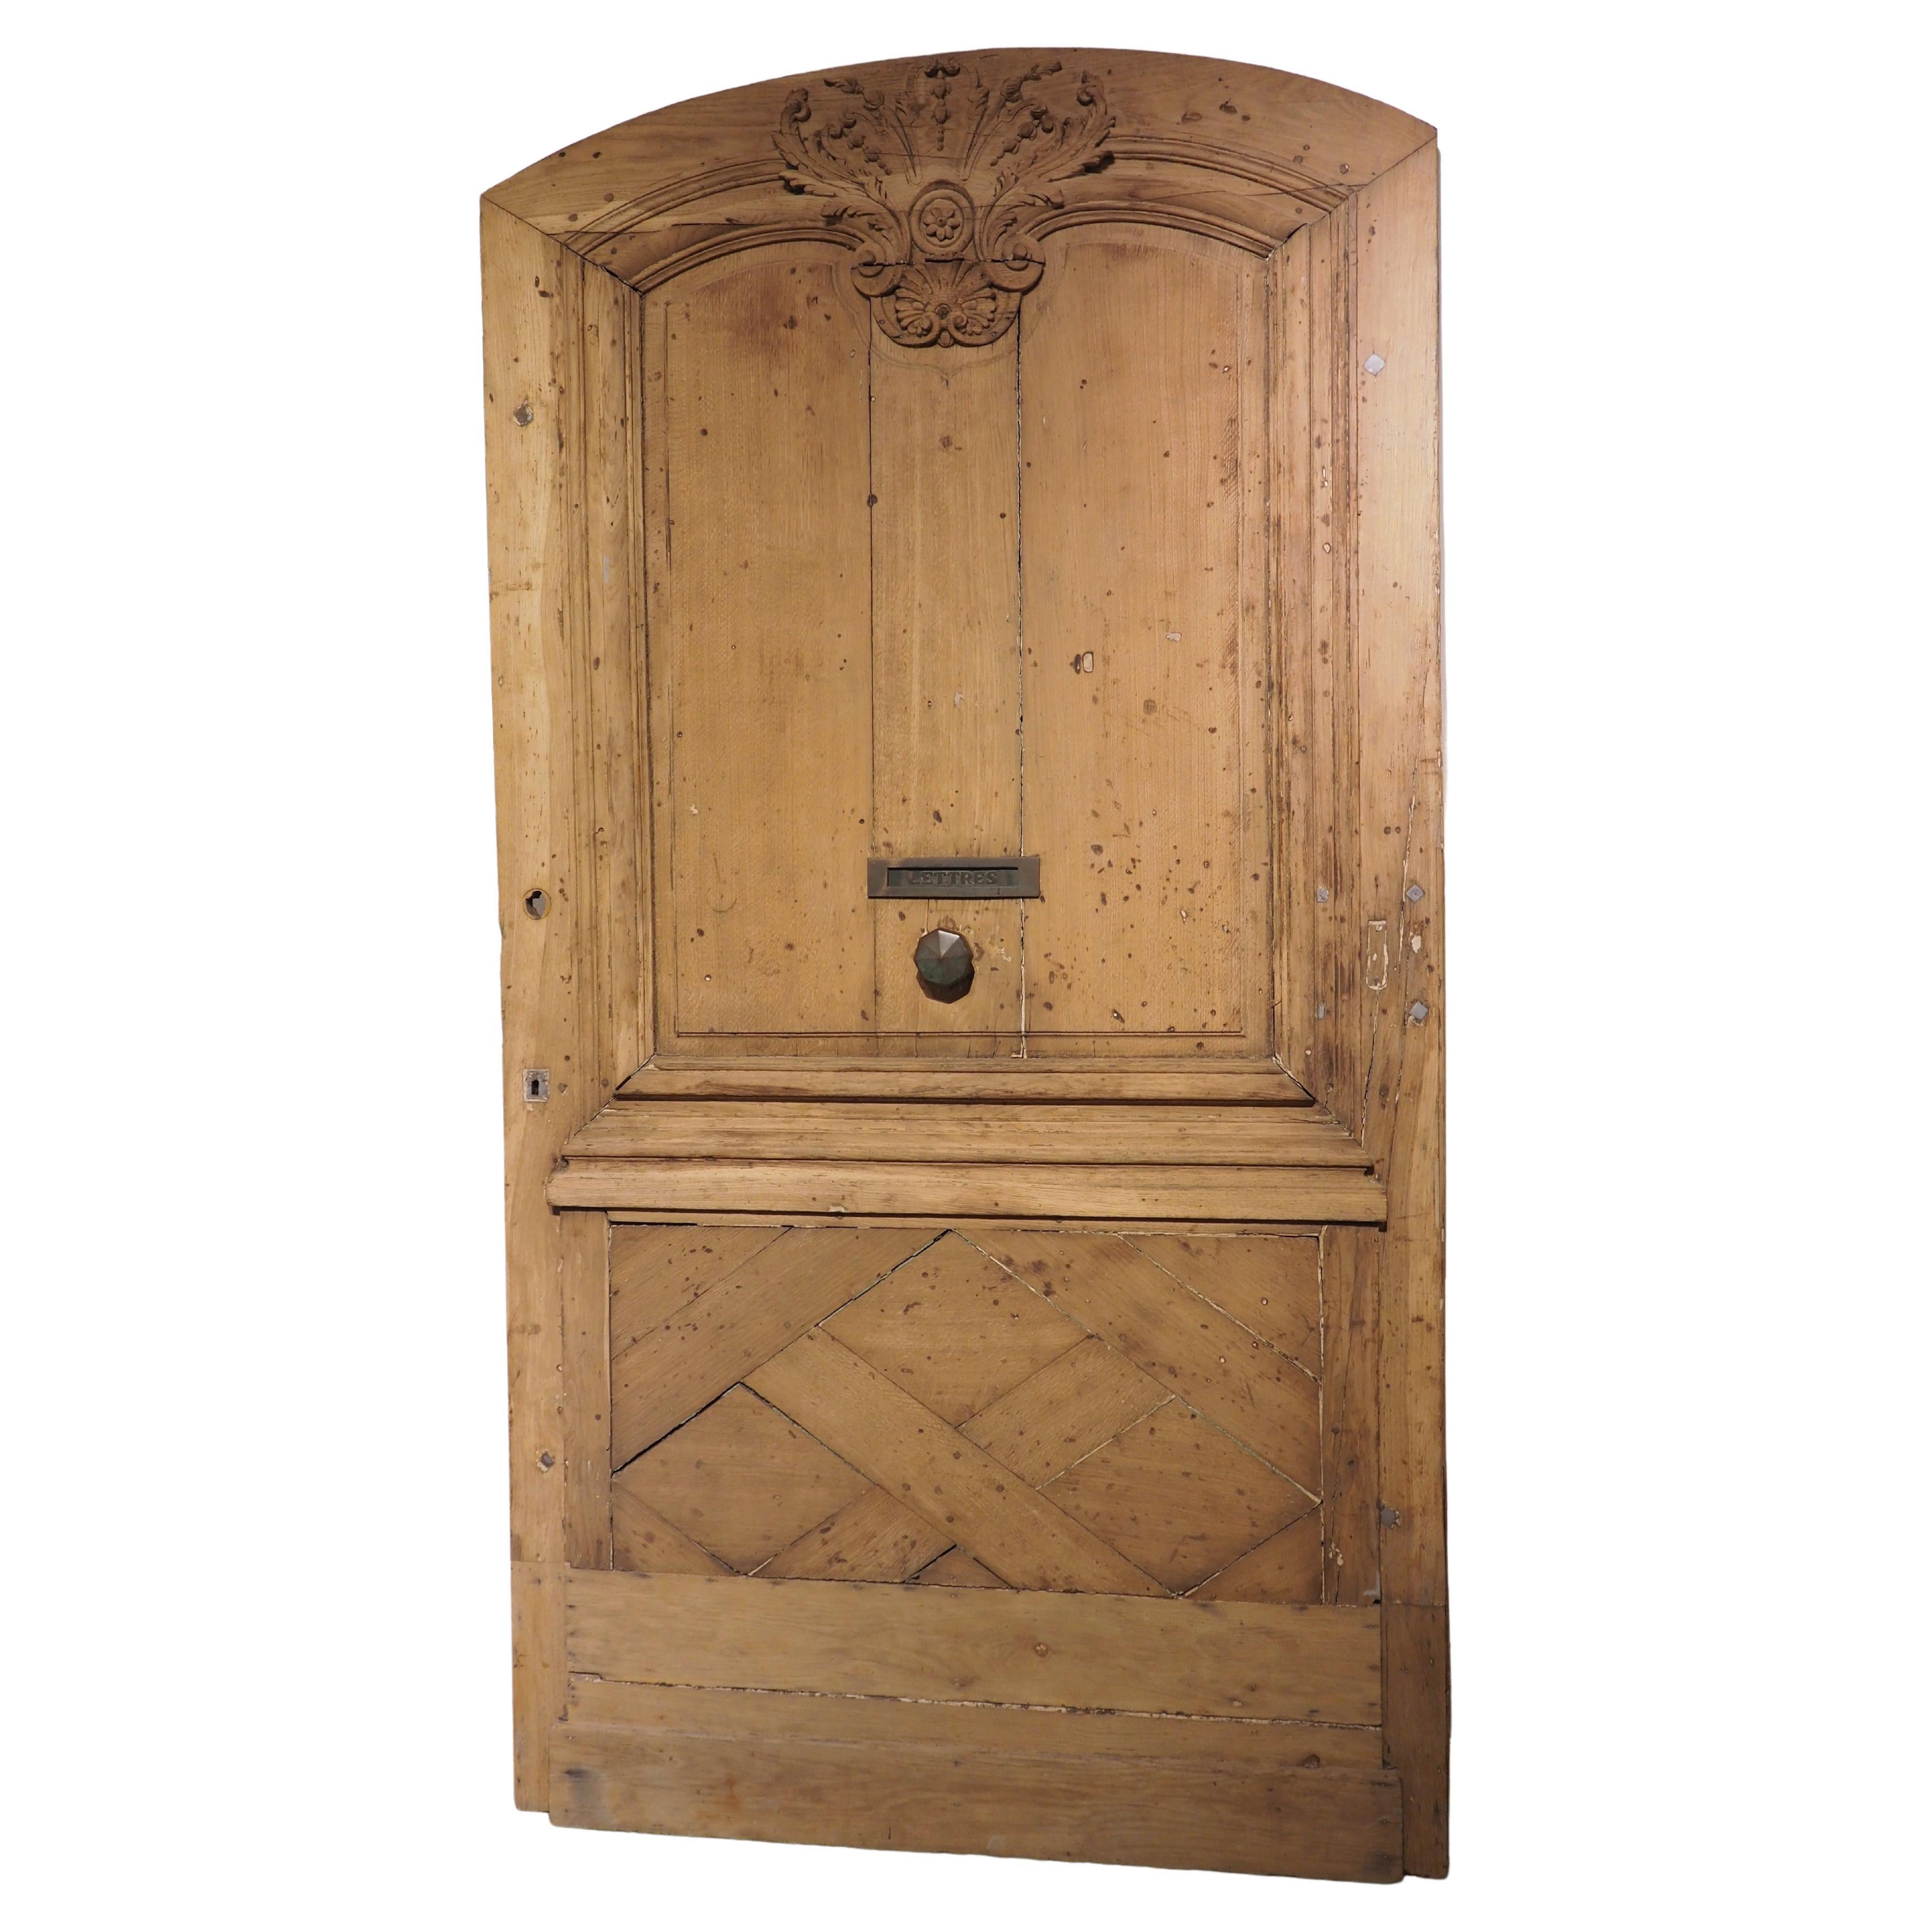 Removed from a large property in Northern France, this antique oak entry door was hand-carved circa 1850. The large door (95 ¾ H x 51 ½ W x 1 ¾ D) has an octagonal metal knob in the center beneath a mail slot marked “Lettres”.

On the upper half